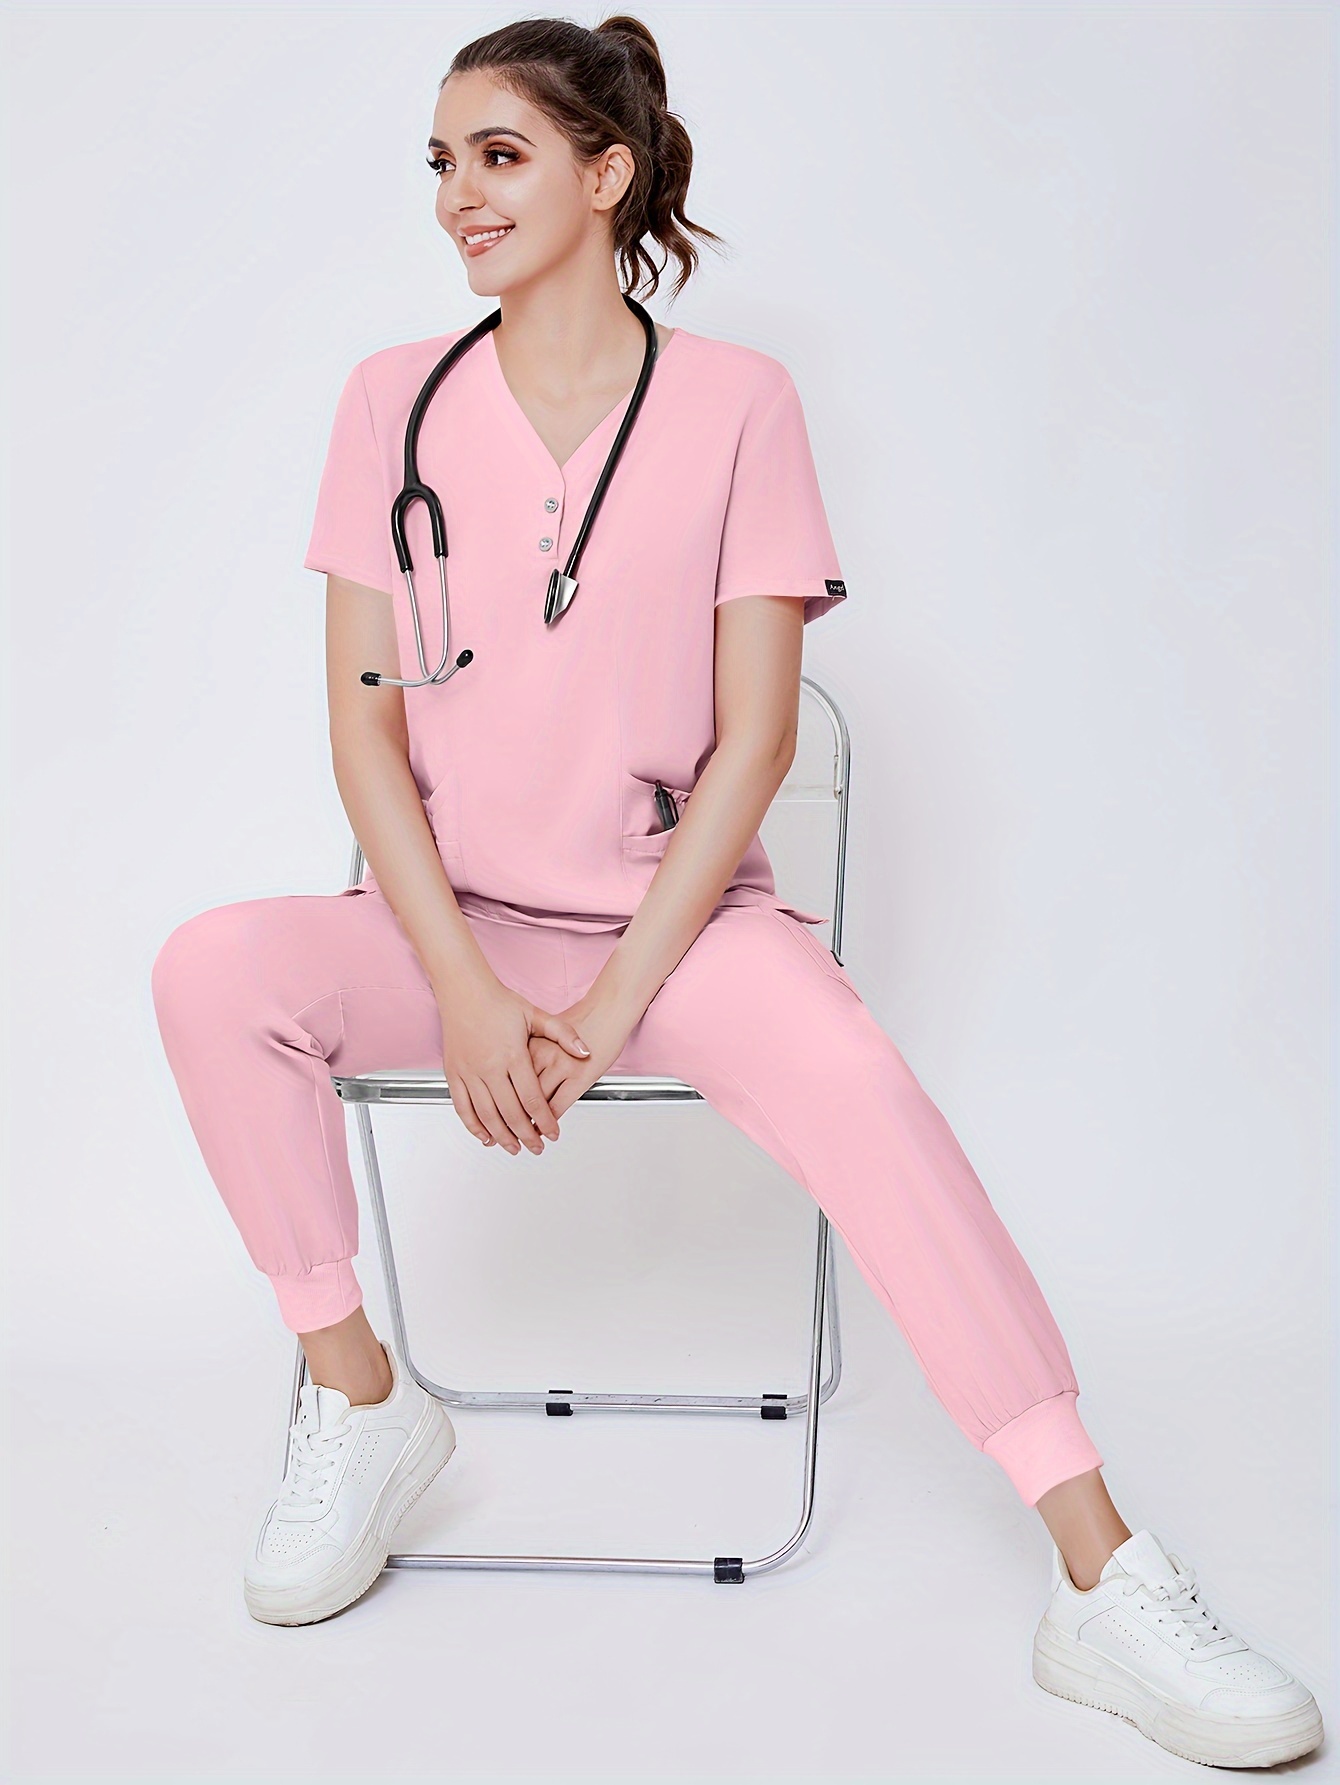 Jogger Scrubs For Women Set Solid Color Lightweight Nursing Dental Y Neck  Medical Scrubs Top And Pants Two Piece With Pockets